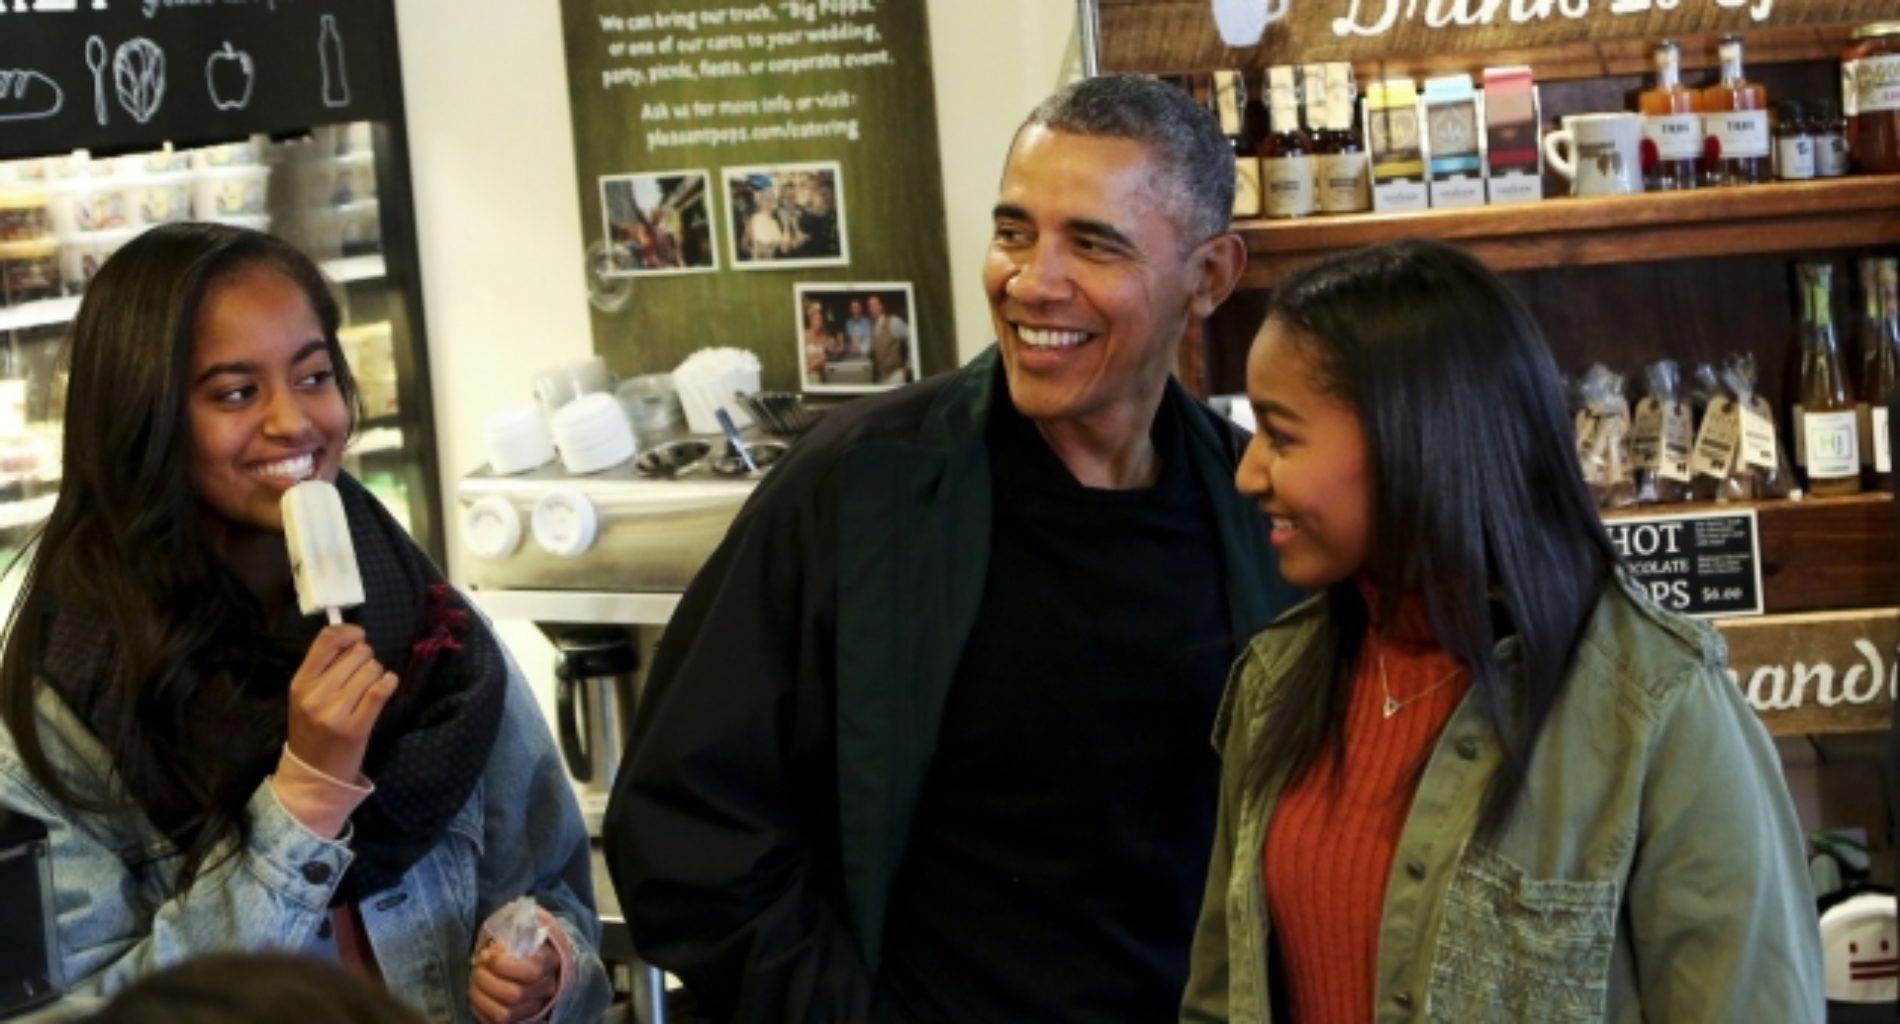 Obama says watching his daughters grow up in LGBT-inclusive generation gives him hope